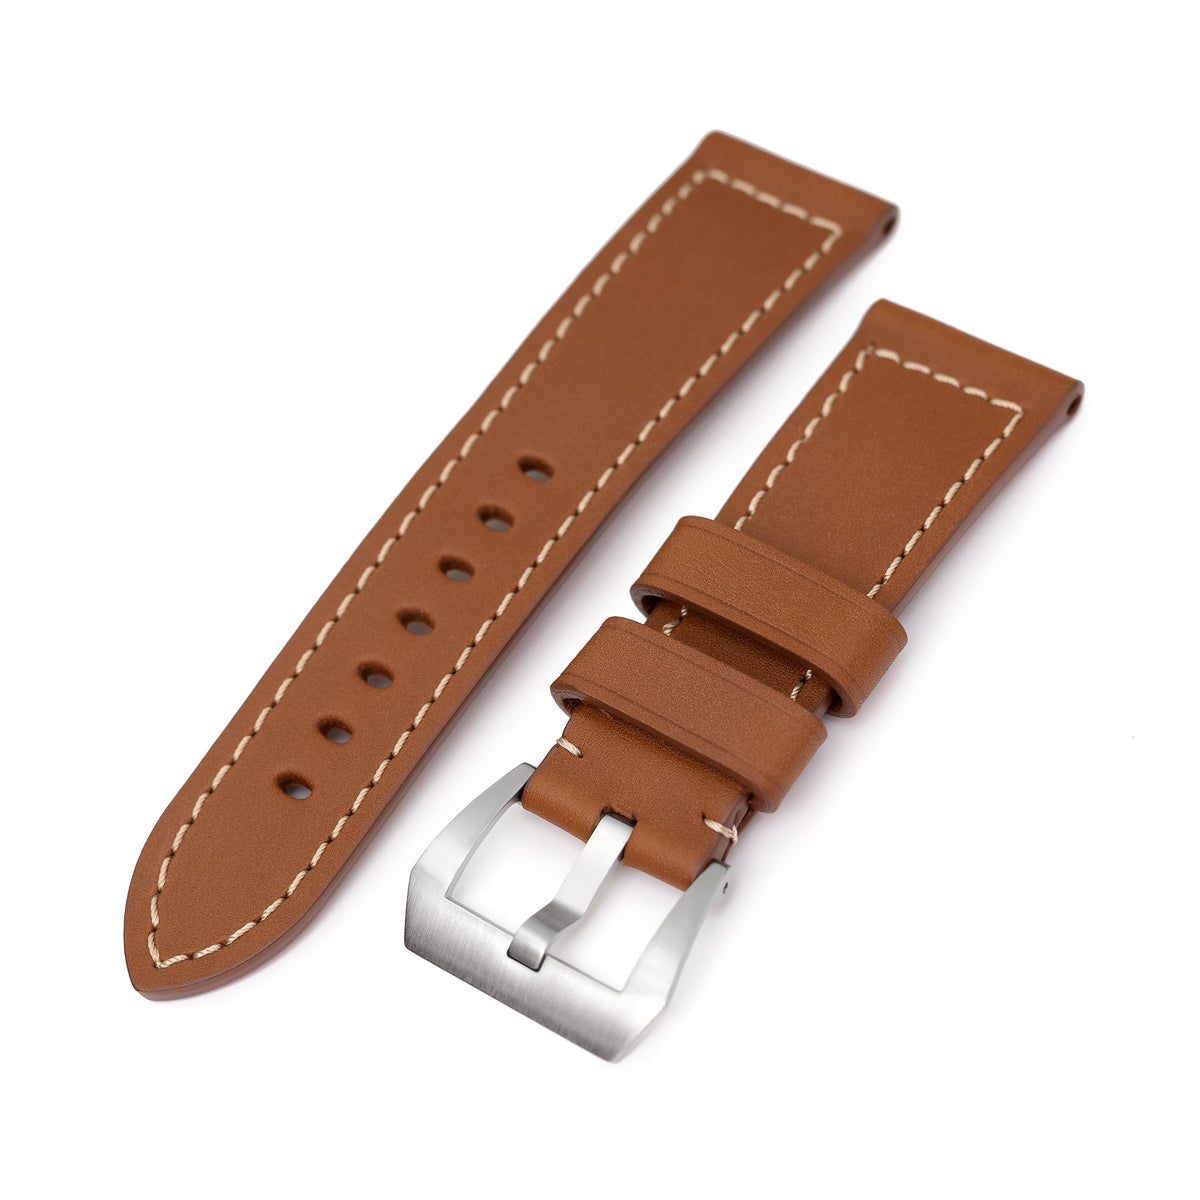 Genuine Leather watch bands | Watch Strap replacement | Strapcode